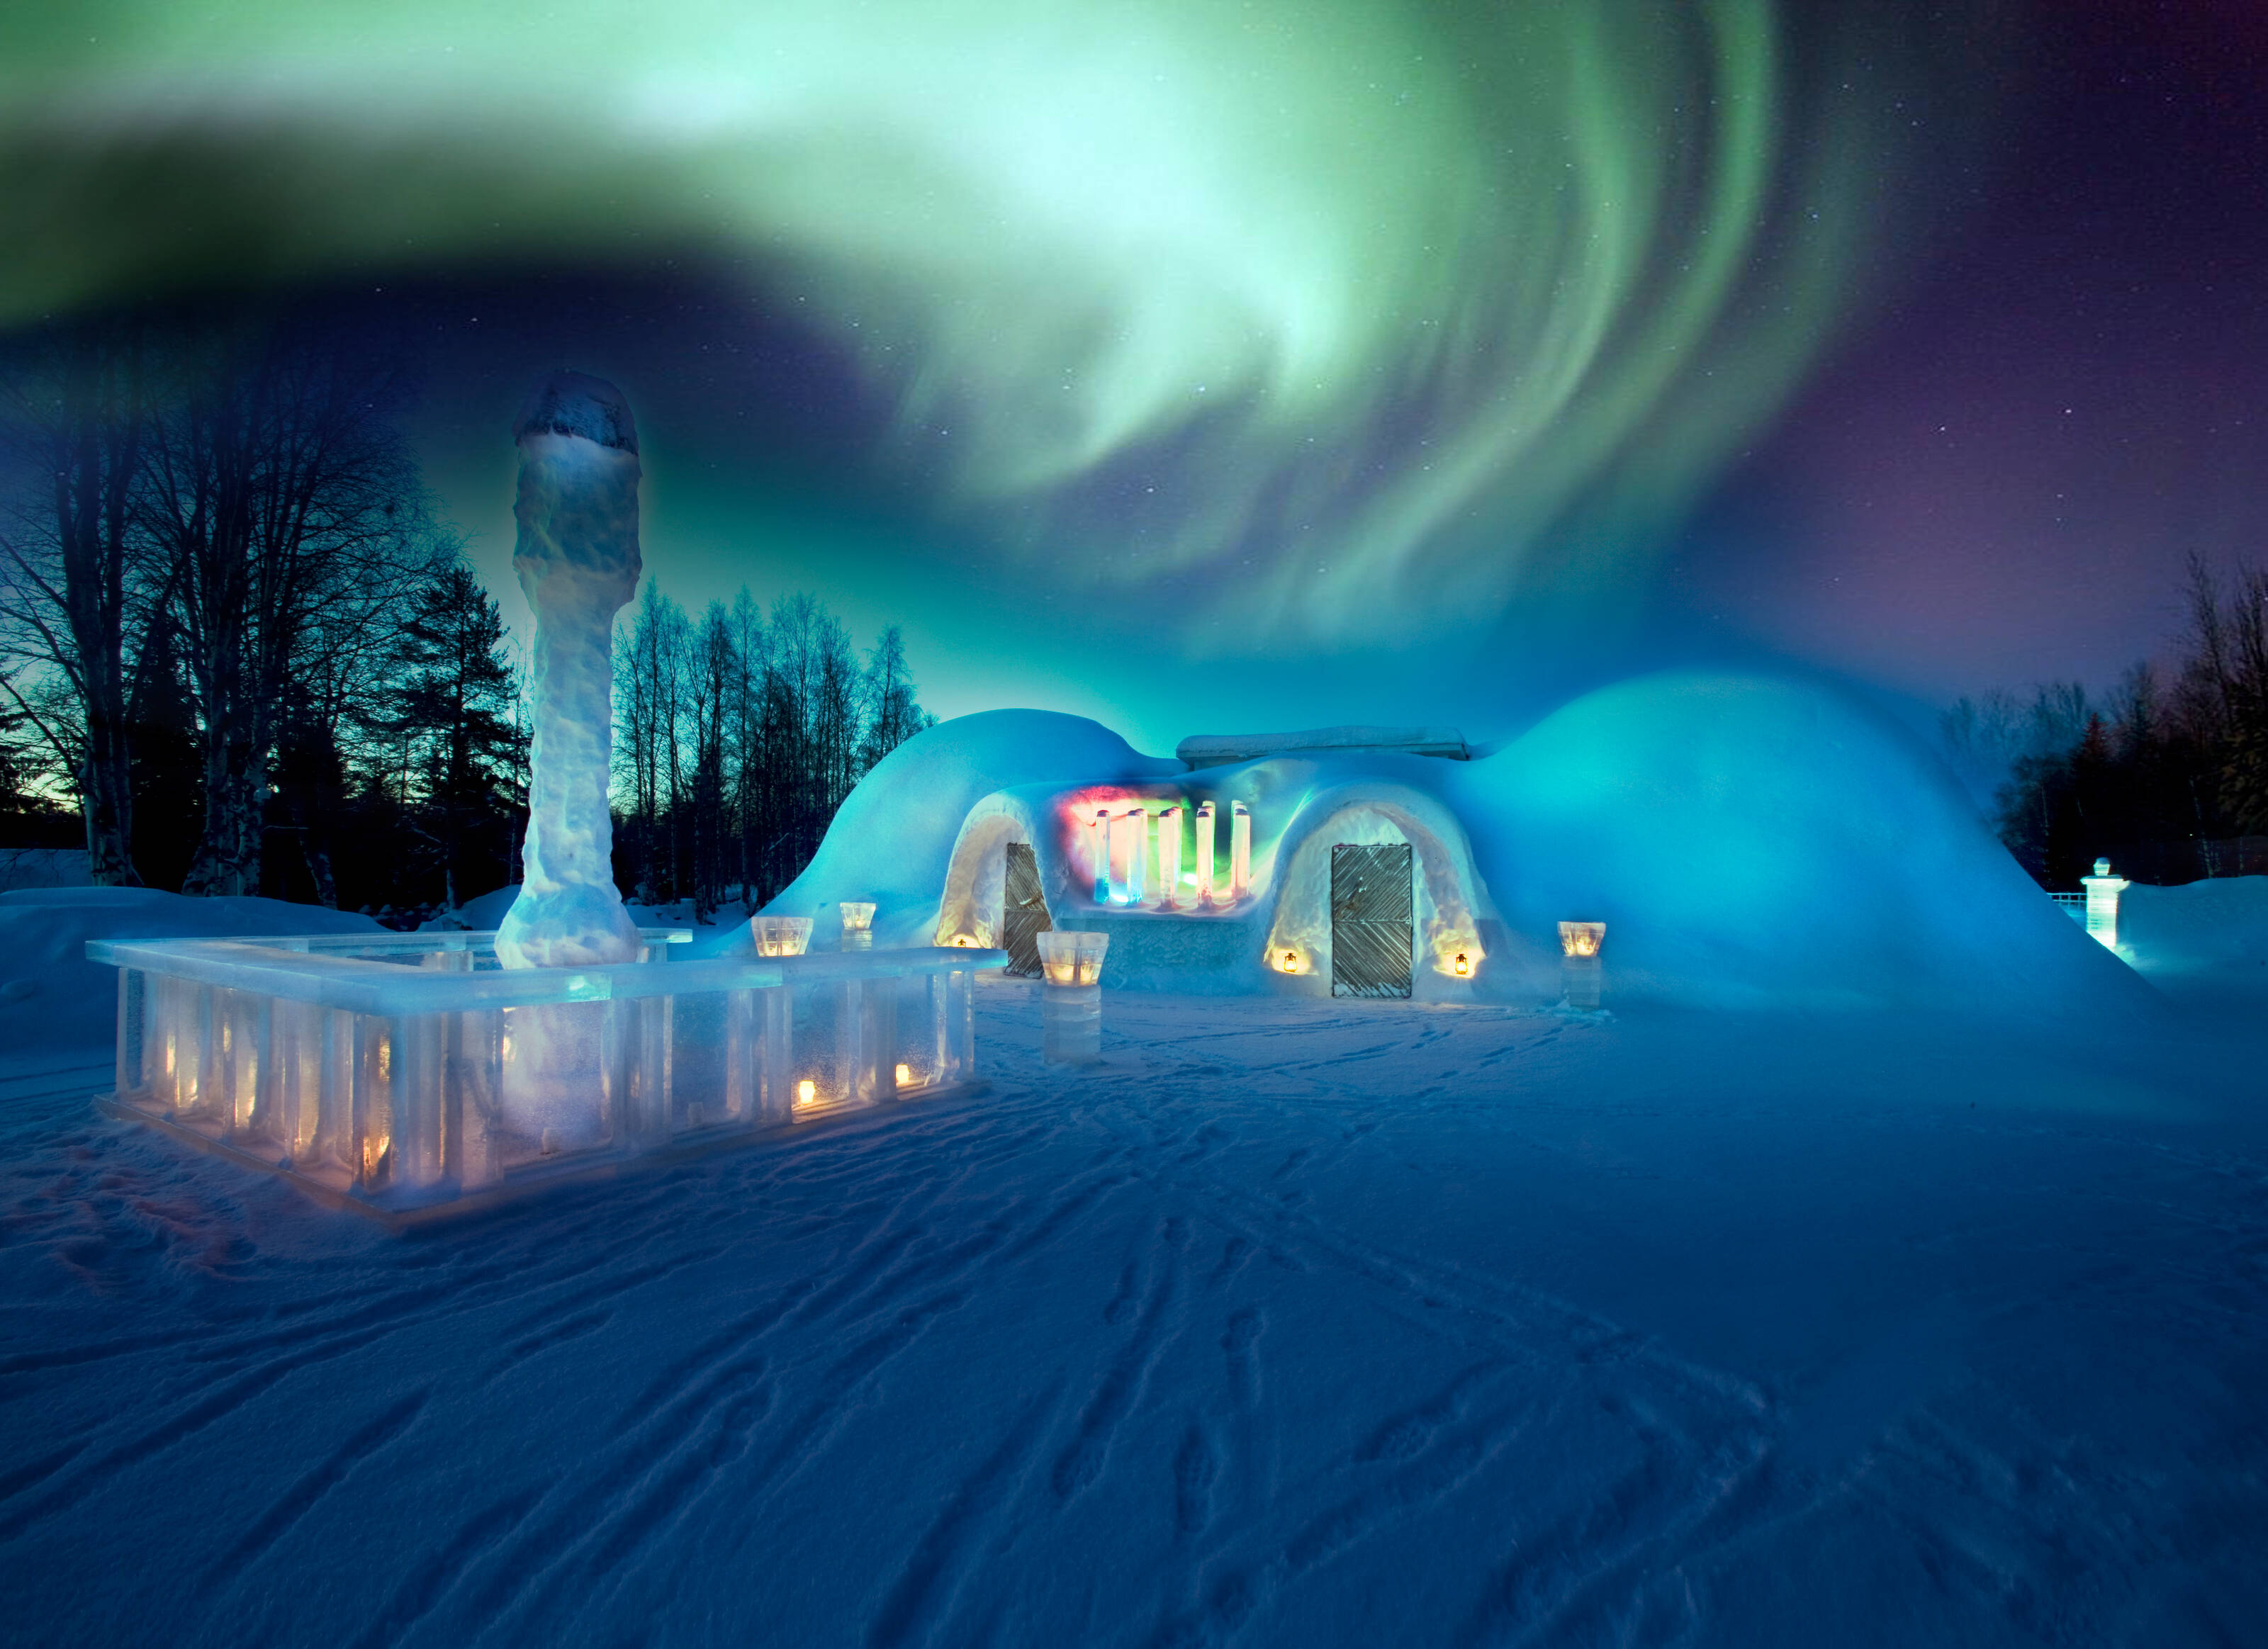 An ice hotel with northern lights in Lapland, Finland